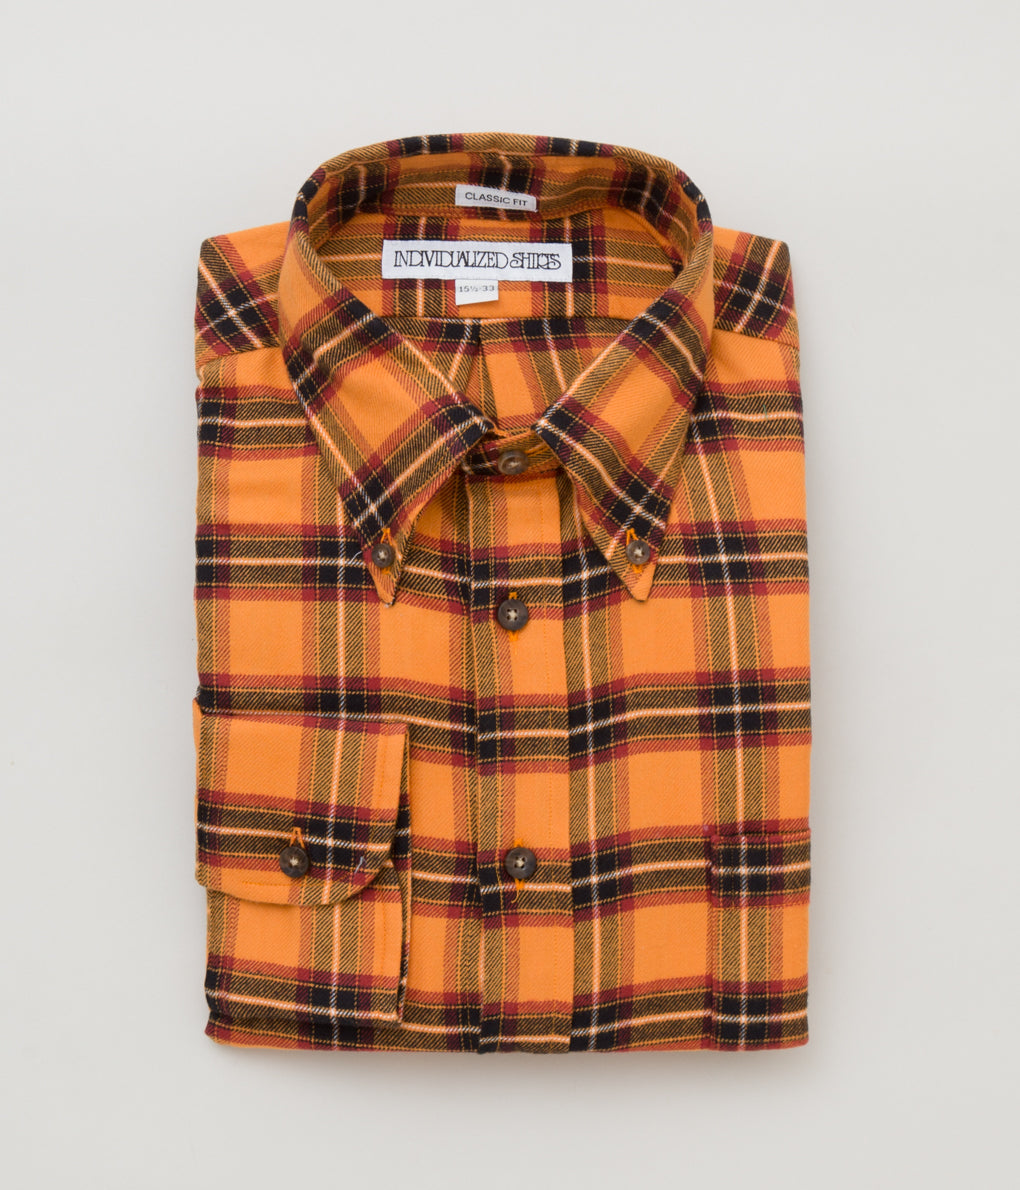 INDIVIDUALIZED SHIRTS "LUMBERJACK FLANNEL CLASSIC FIT BUTTON DOWN SHIRT(YELLOW)"